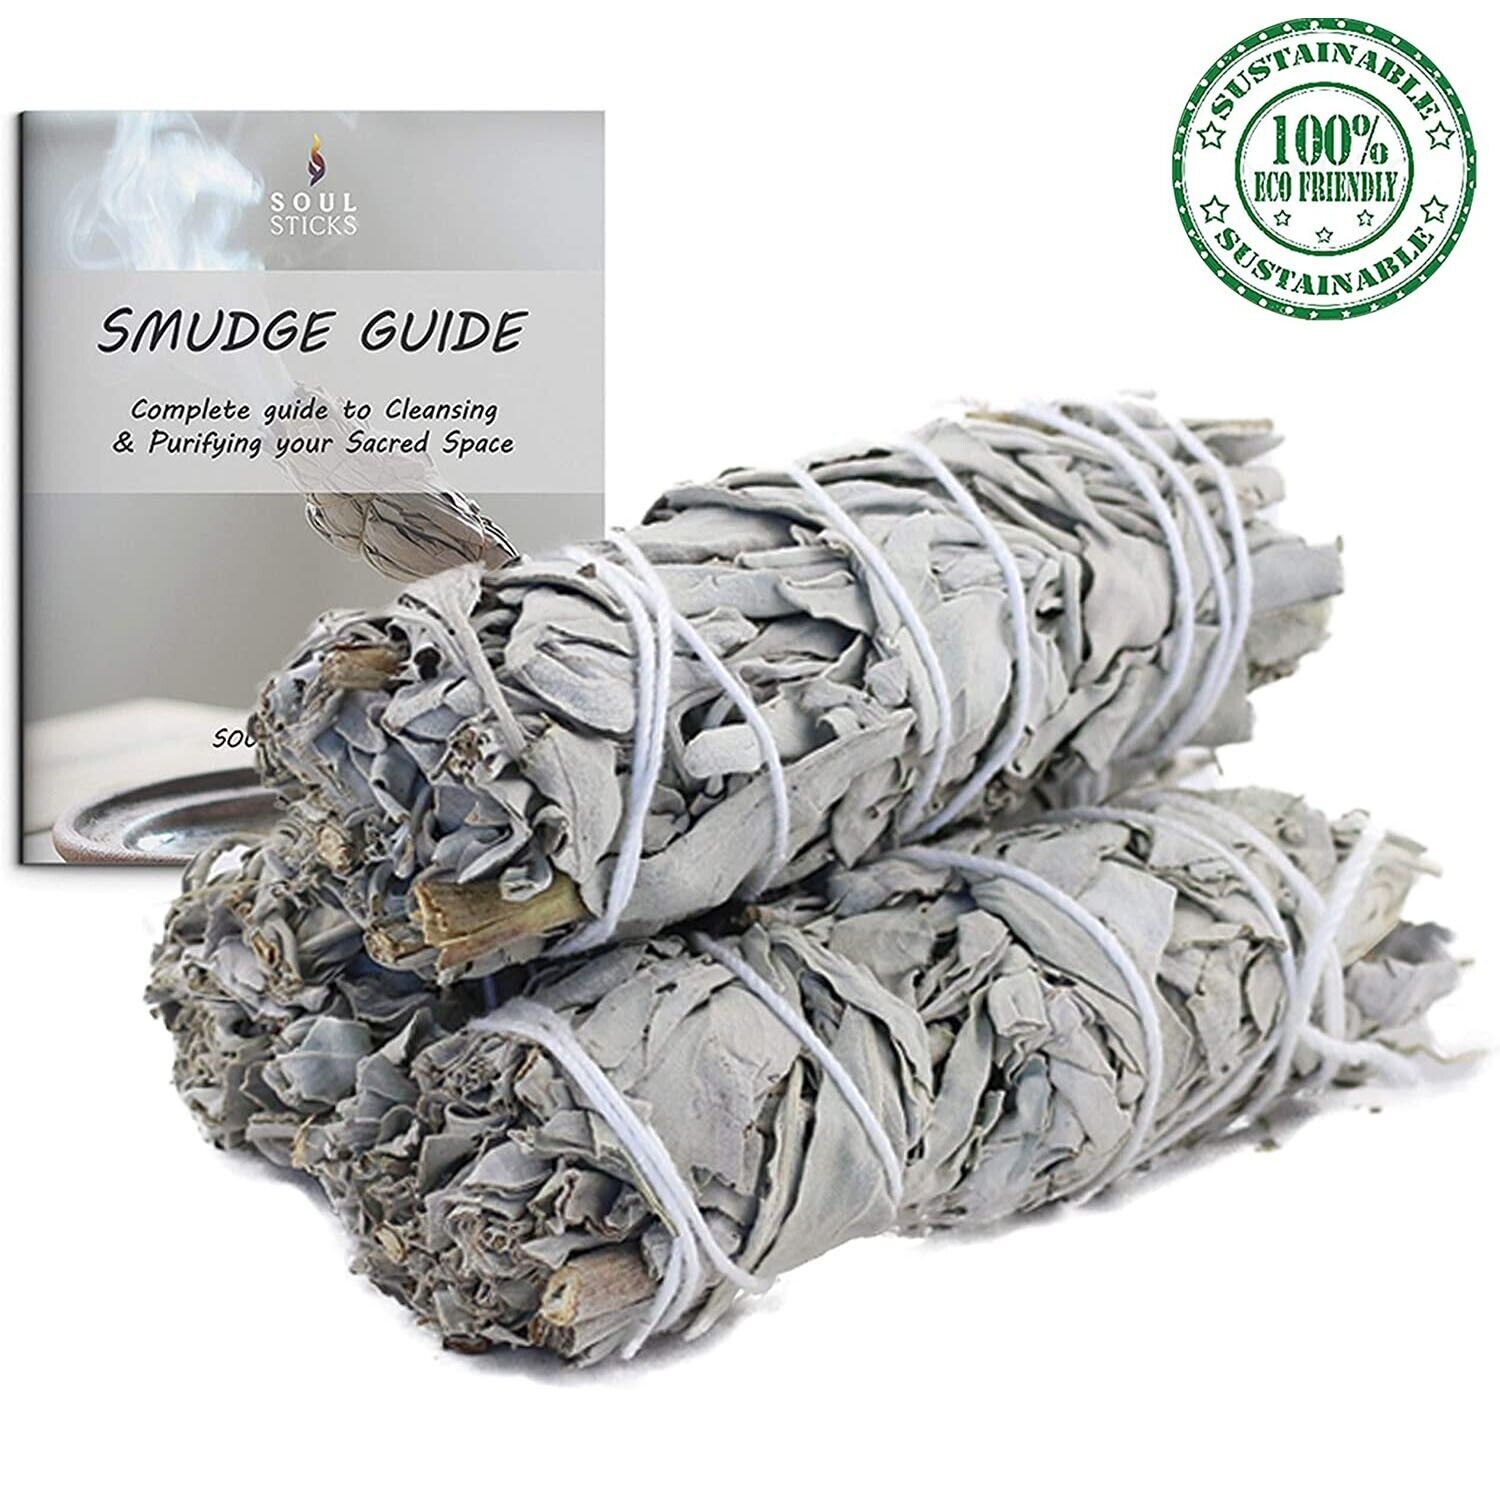 3 Pack White Sage Smudge Sticks 4 Inch with Smudge Guide For Cleansing Smudging